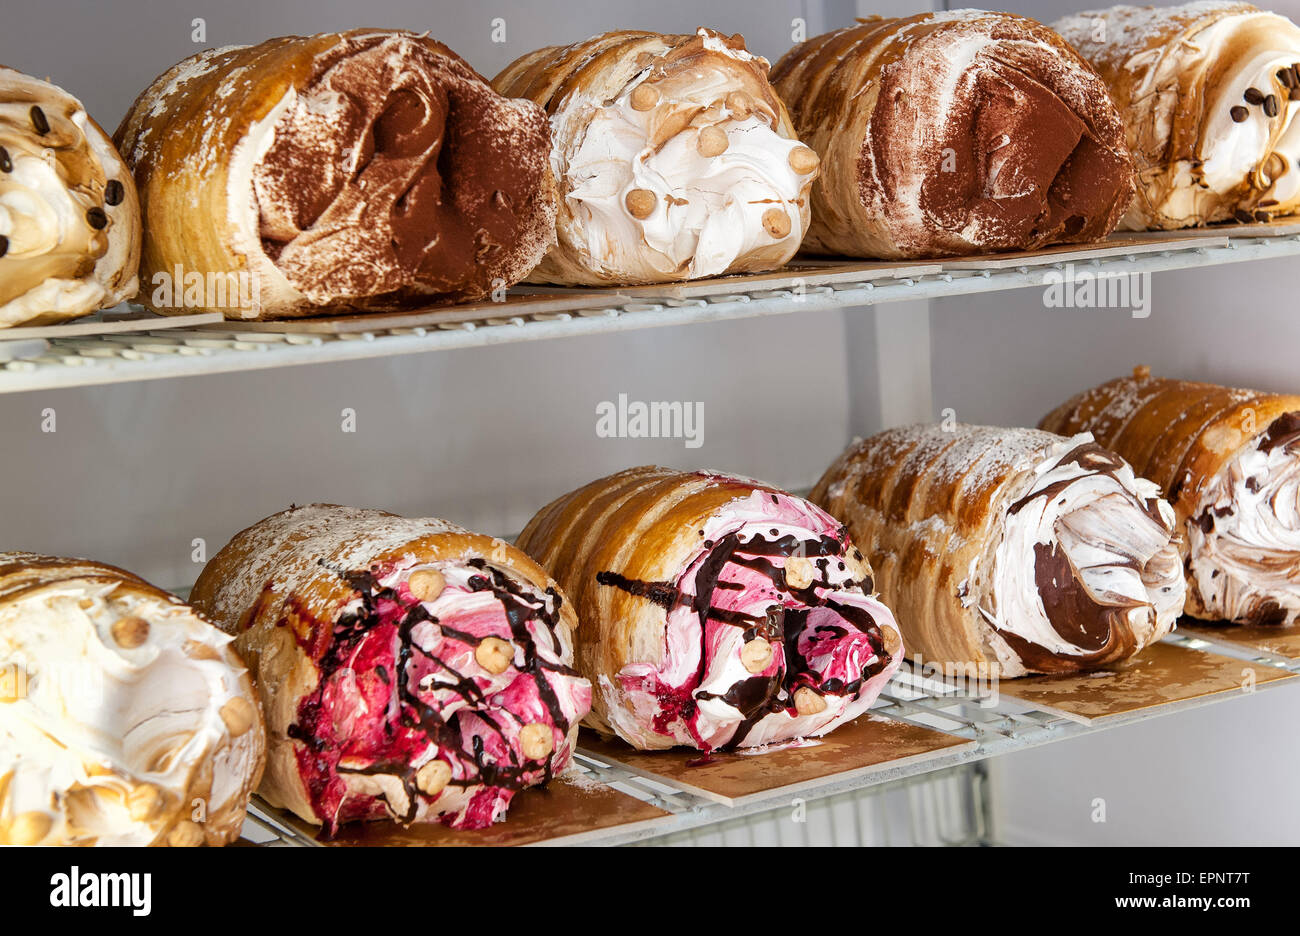 Gourmet Italian semifreddo desserts in a refrigerator made with semi-frozen ice cream and whipped cream in a parfait mousse in a Stock Photo